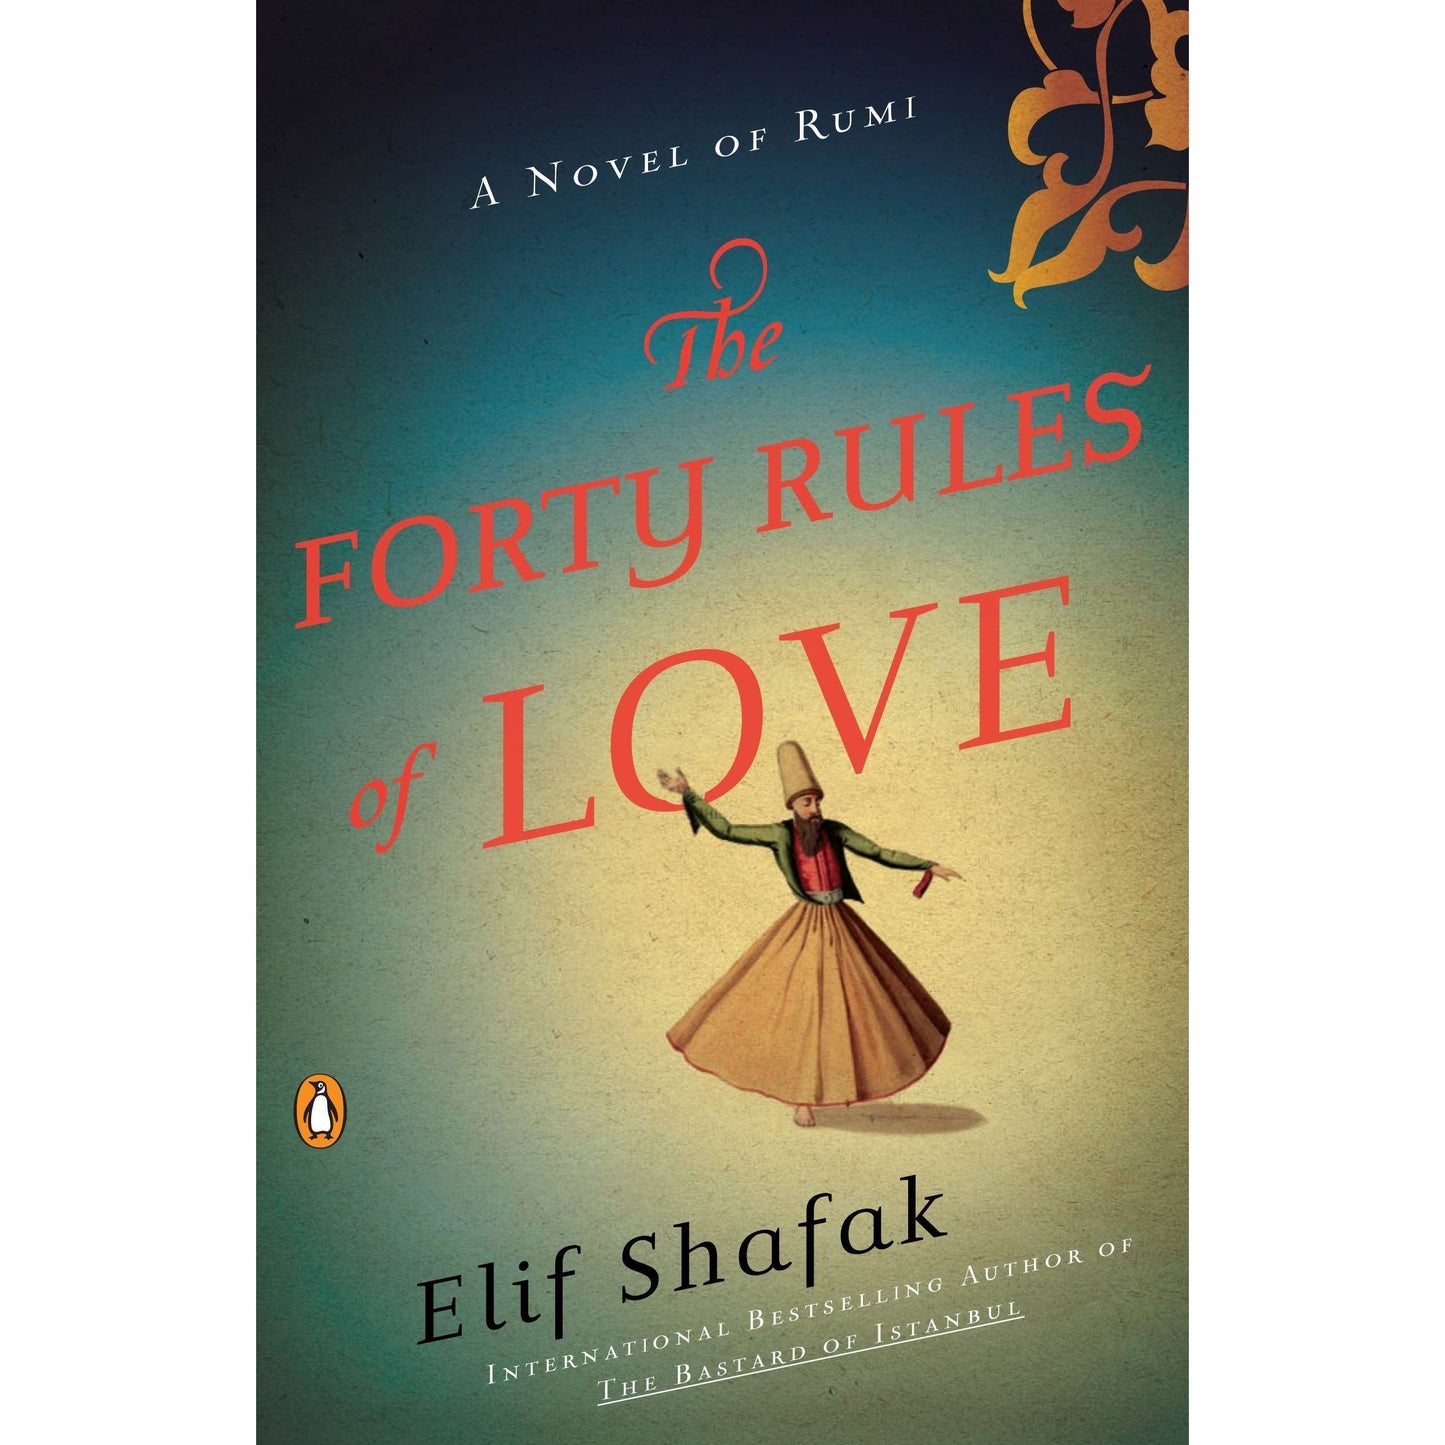 The Forty Rules of Love: A Novel of Rumi By Elif Shafak